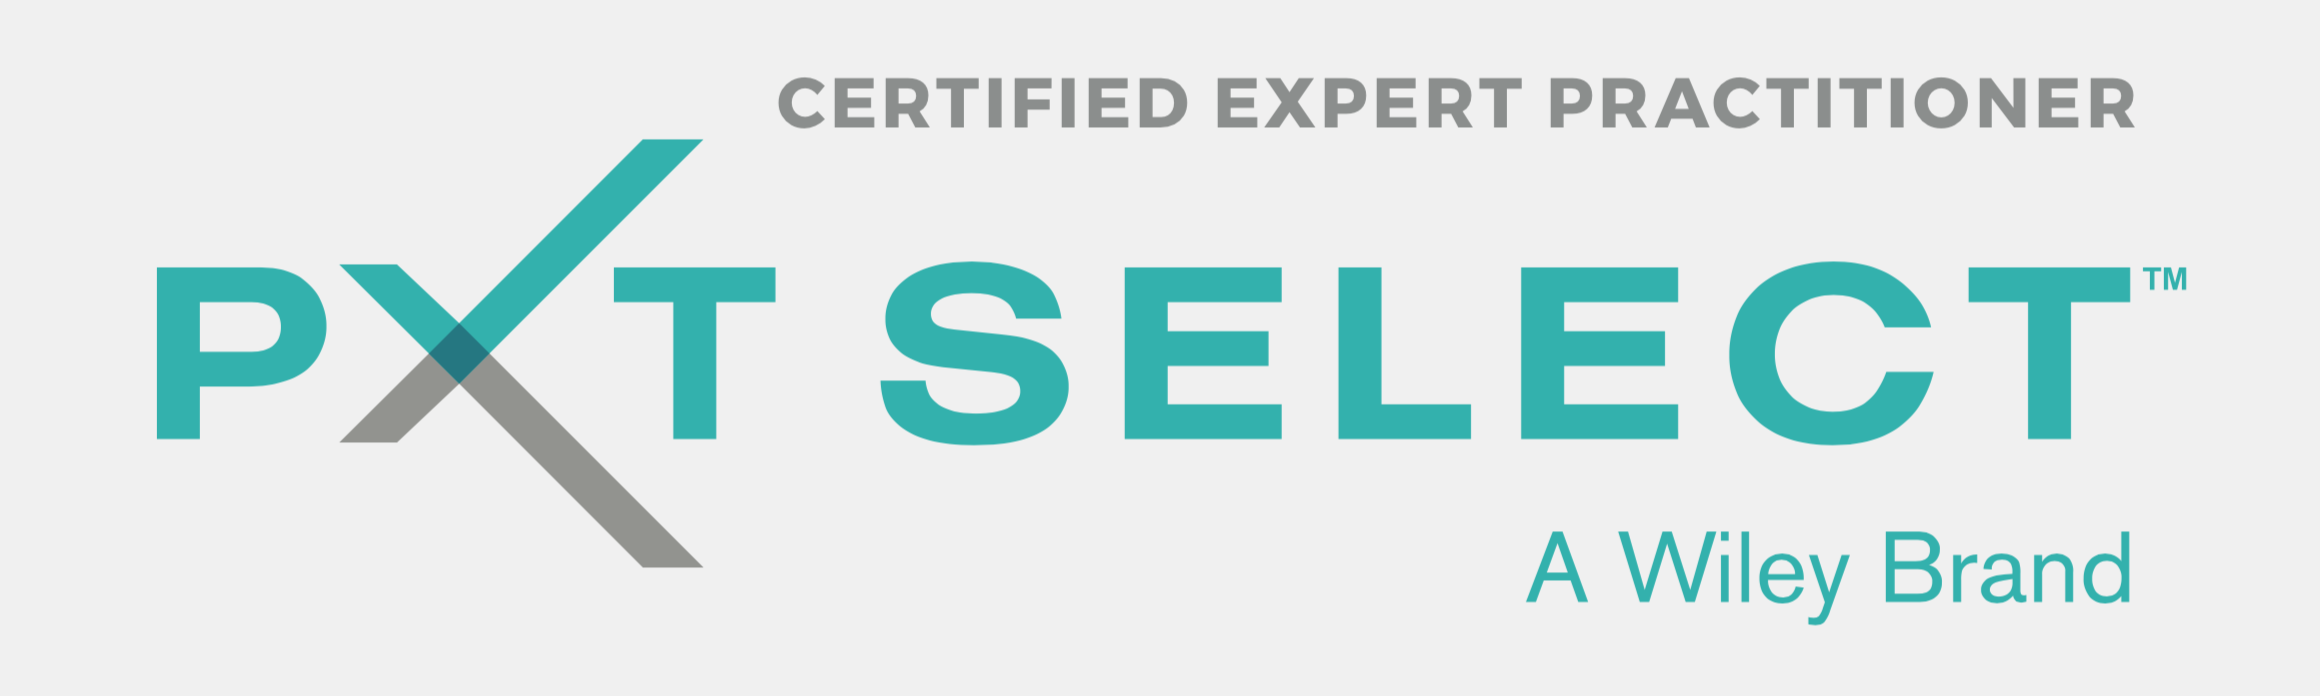 PXT Select Certified Expert Practitioner